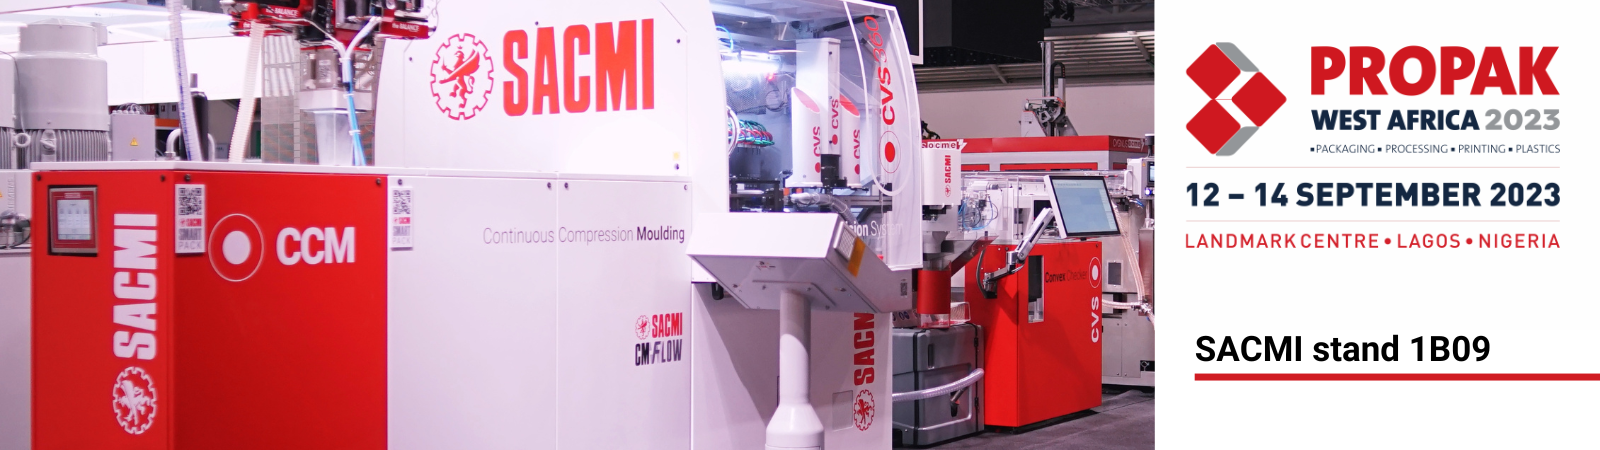 New standards and the green transition: SACMI to take center-stage at Propak West Africa